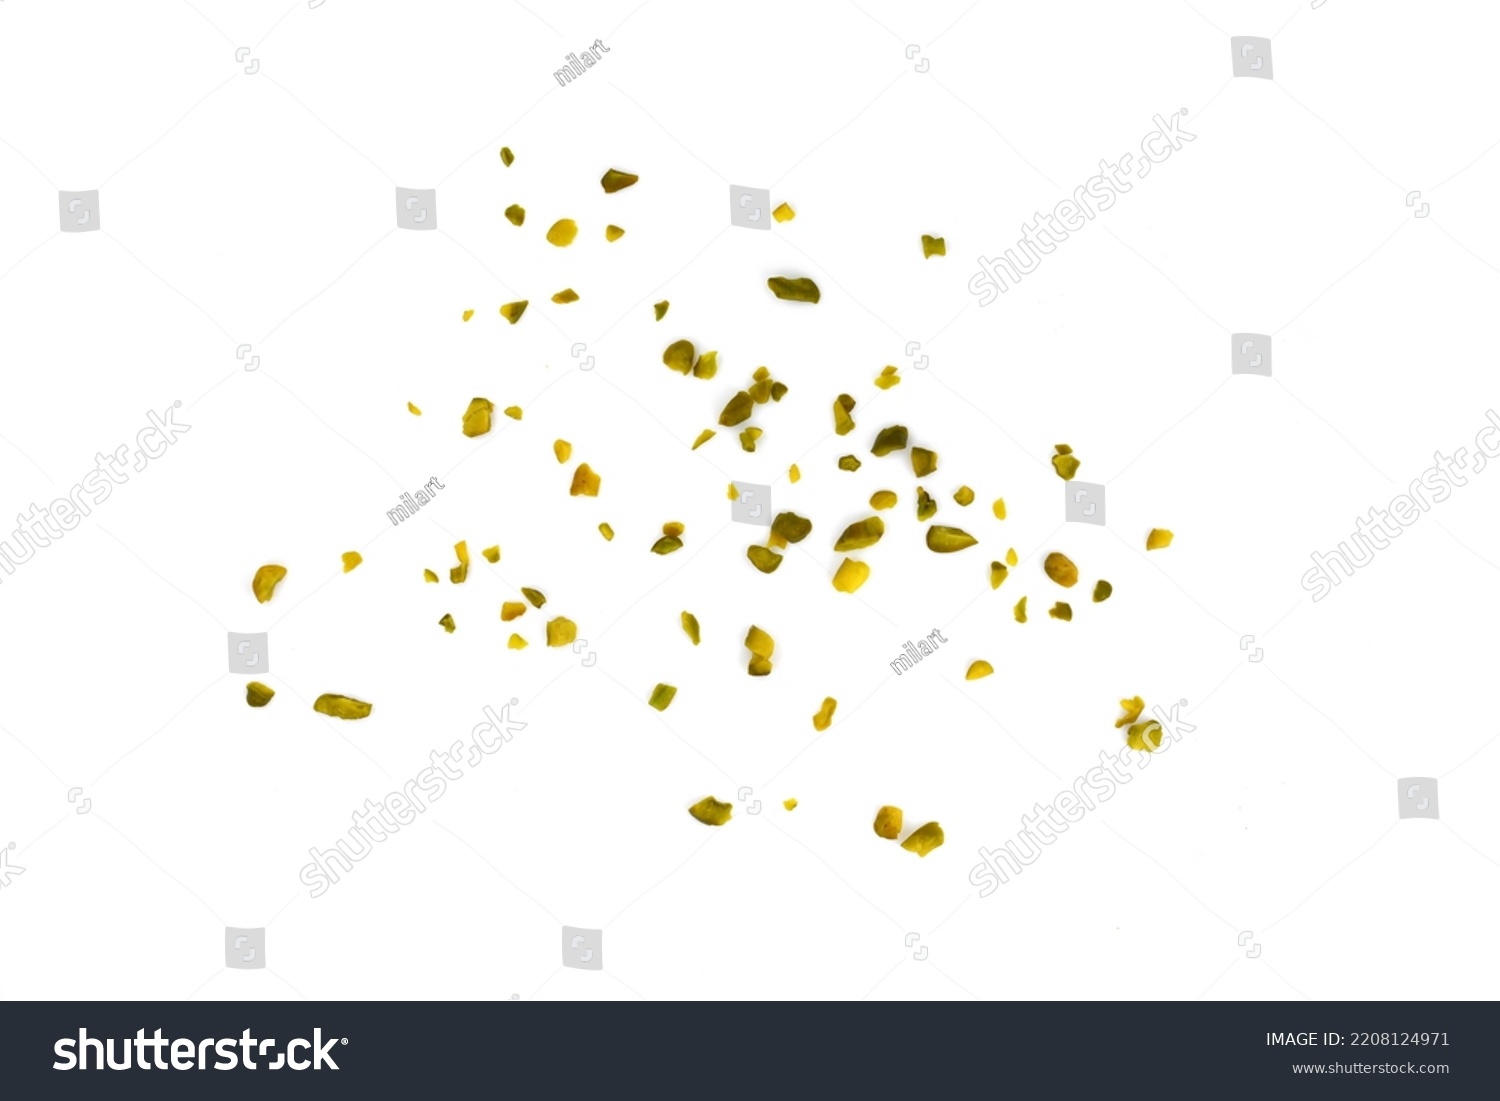 Ground, milled, crushed or granulated pistachio pile isolated on white background #2208124971